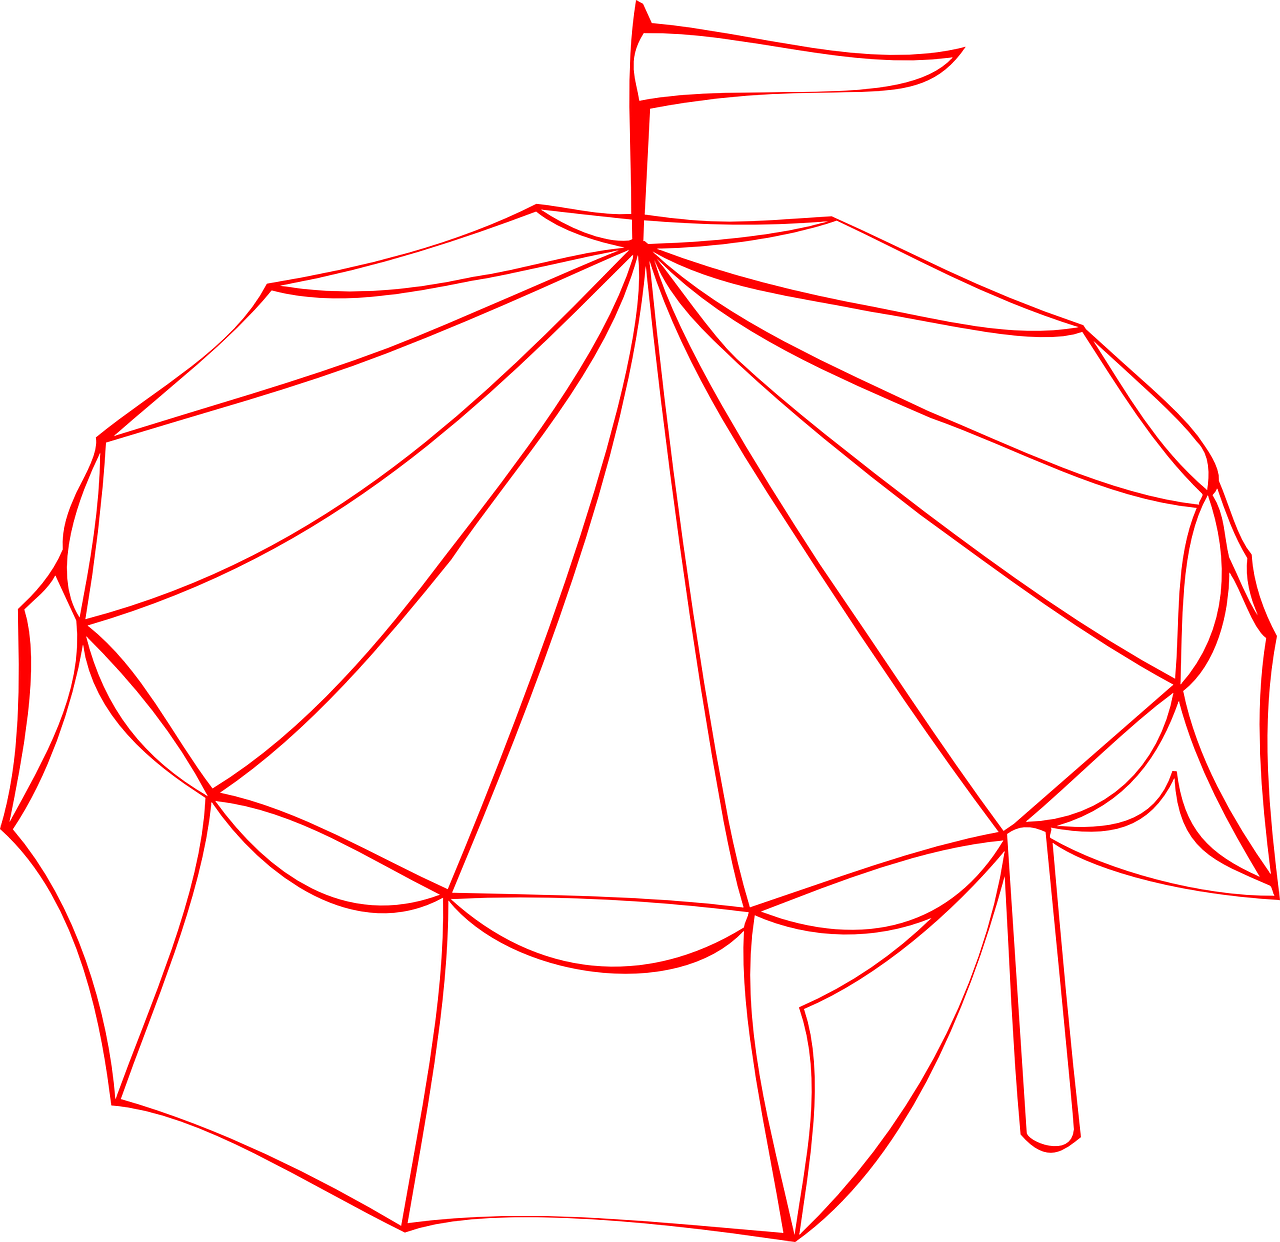 a circus tent with a flag on top of it, concept art, by Andrei Kolkoutine, conceptual art, red on black, outline, very round, overhead canopy